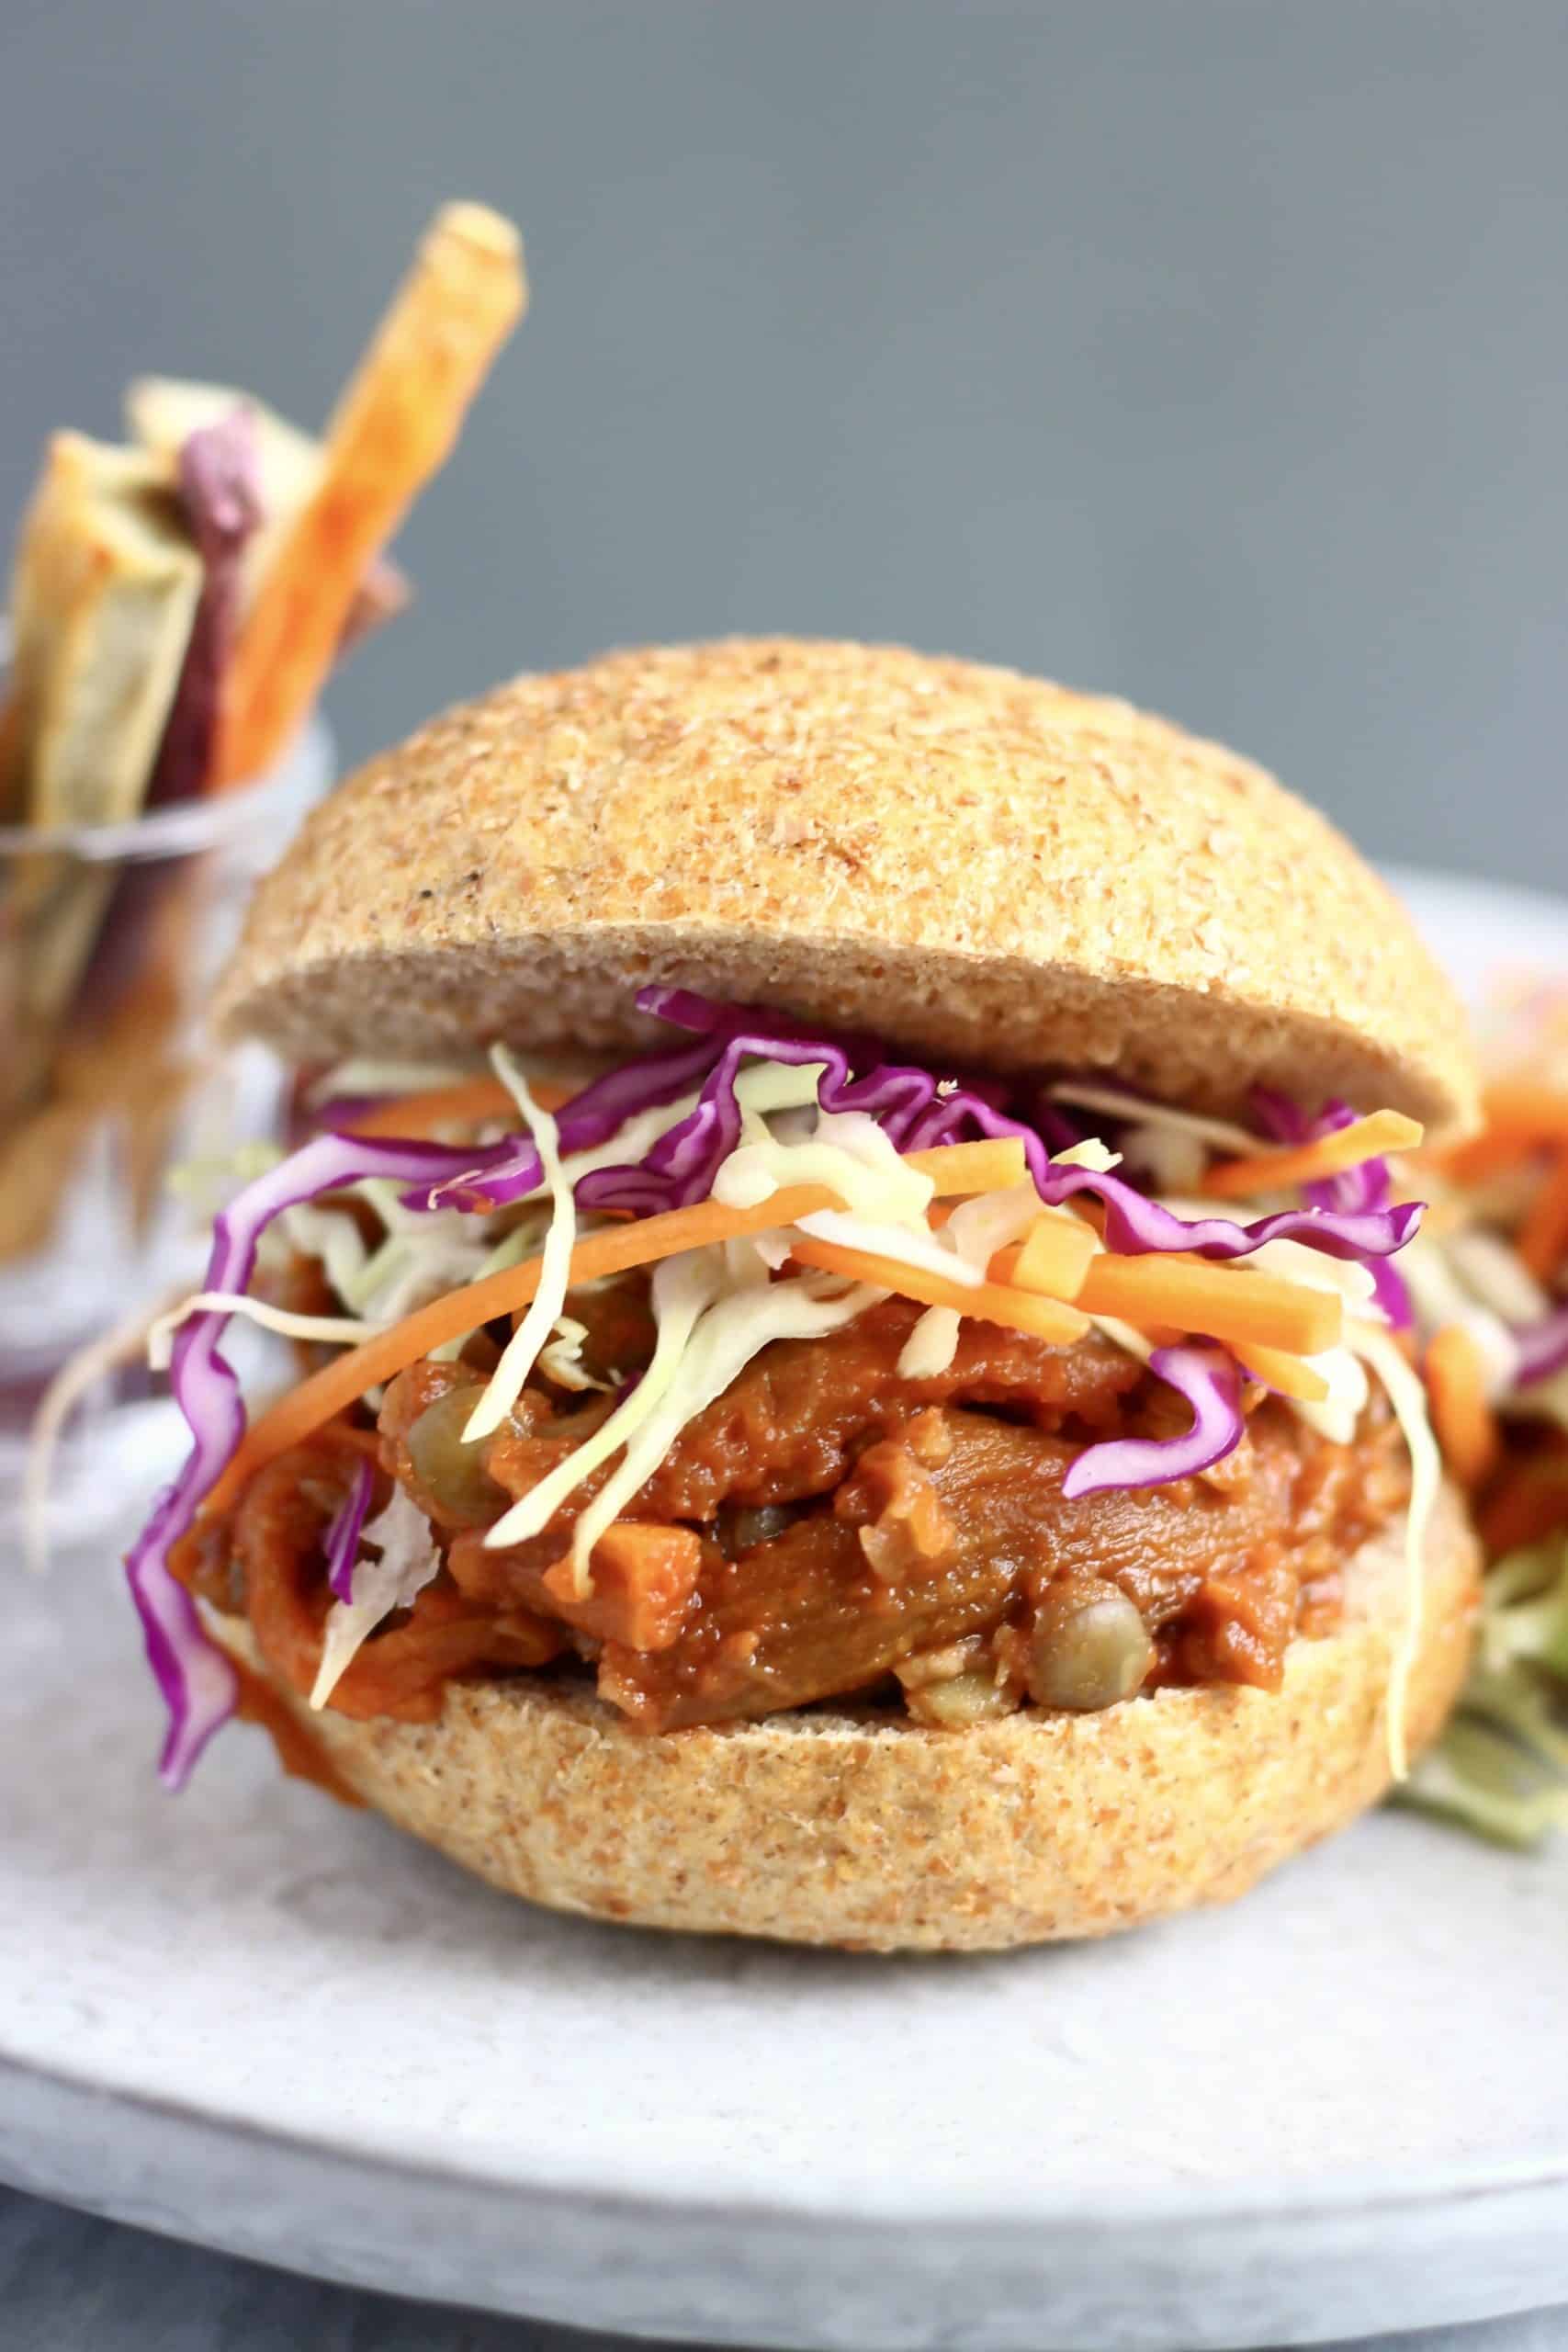 Vegan eggplant pulled pork burger with coleslaw on a white plate